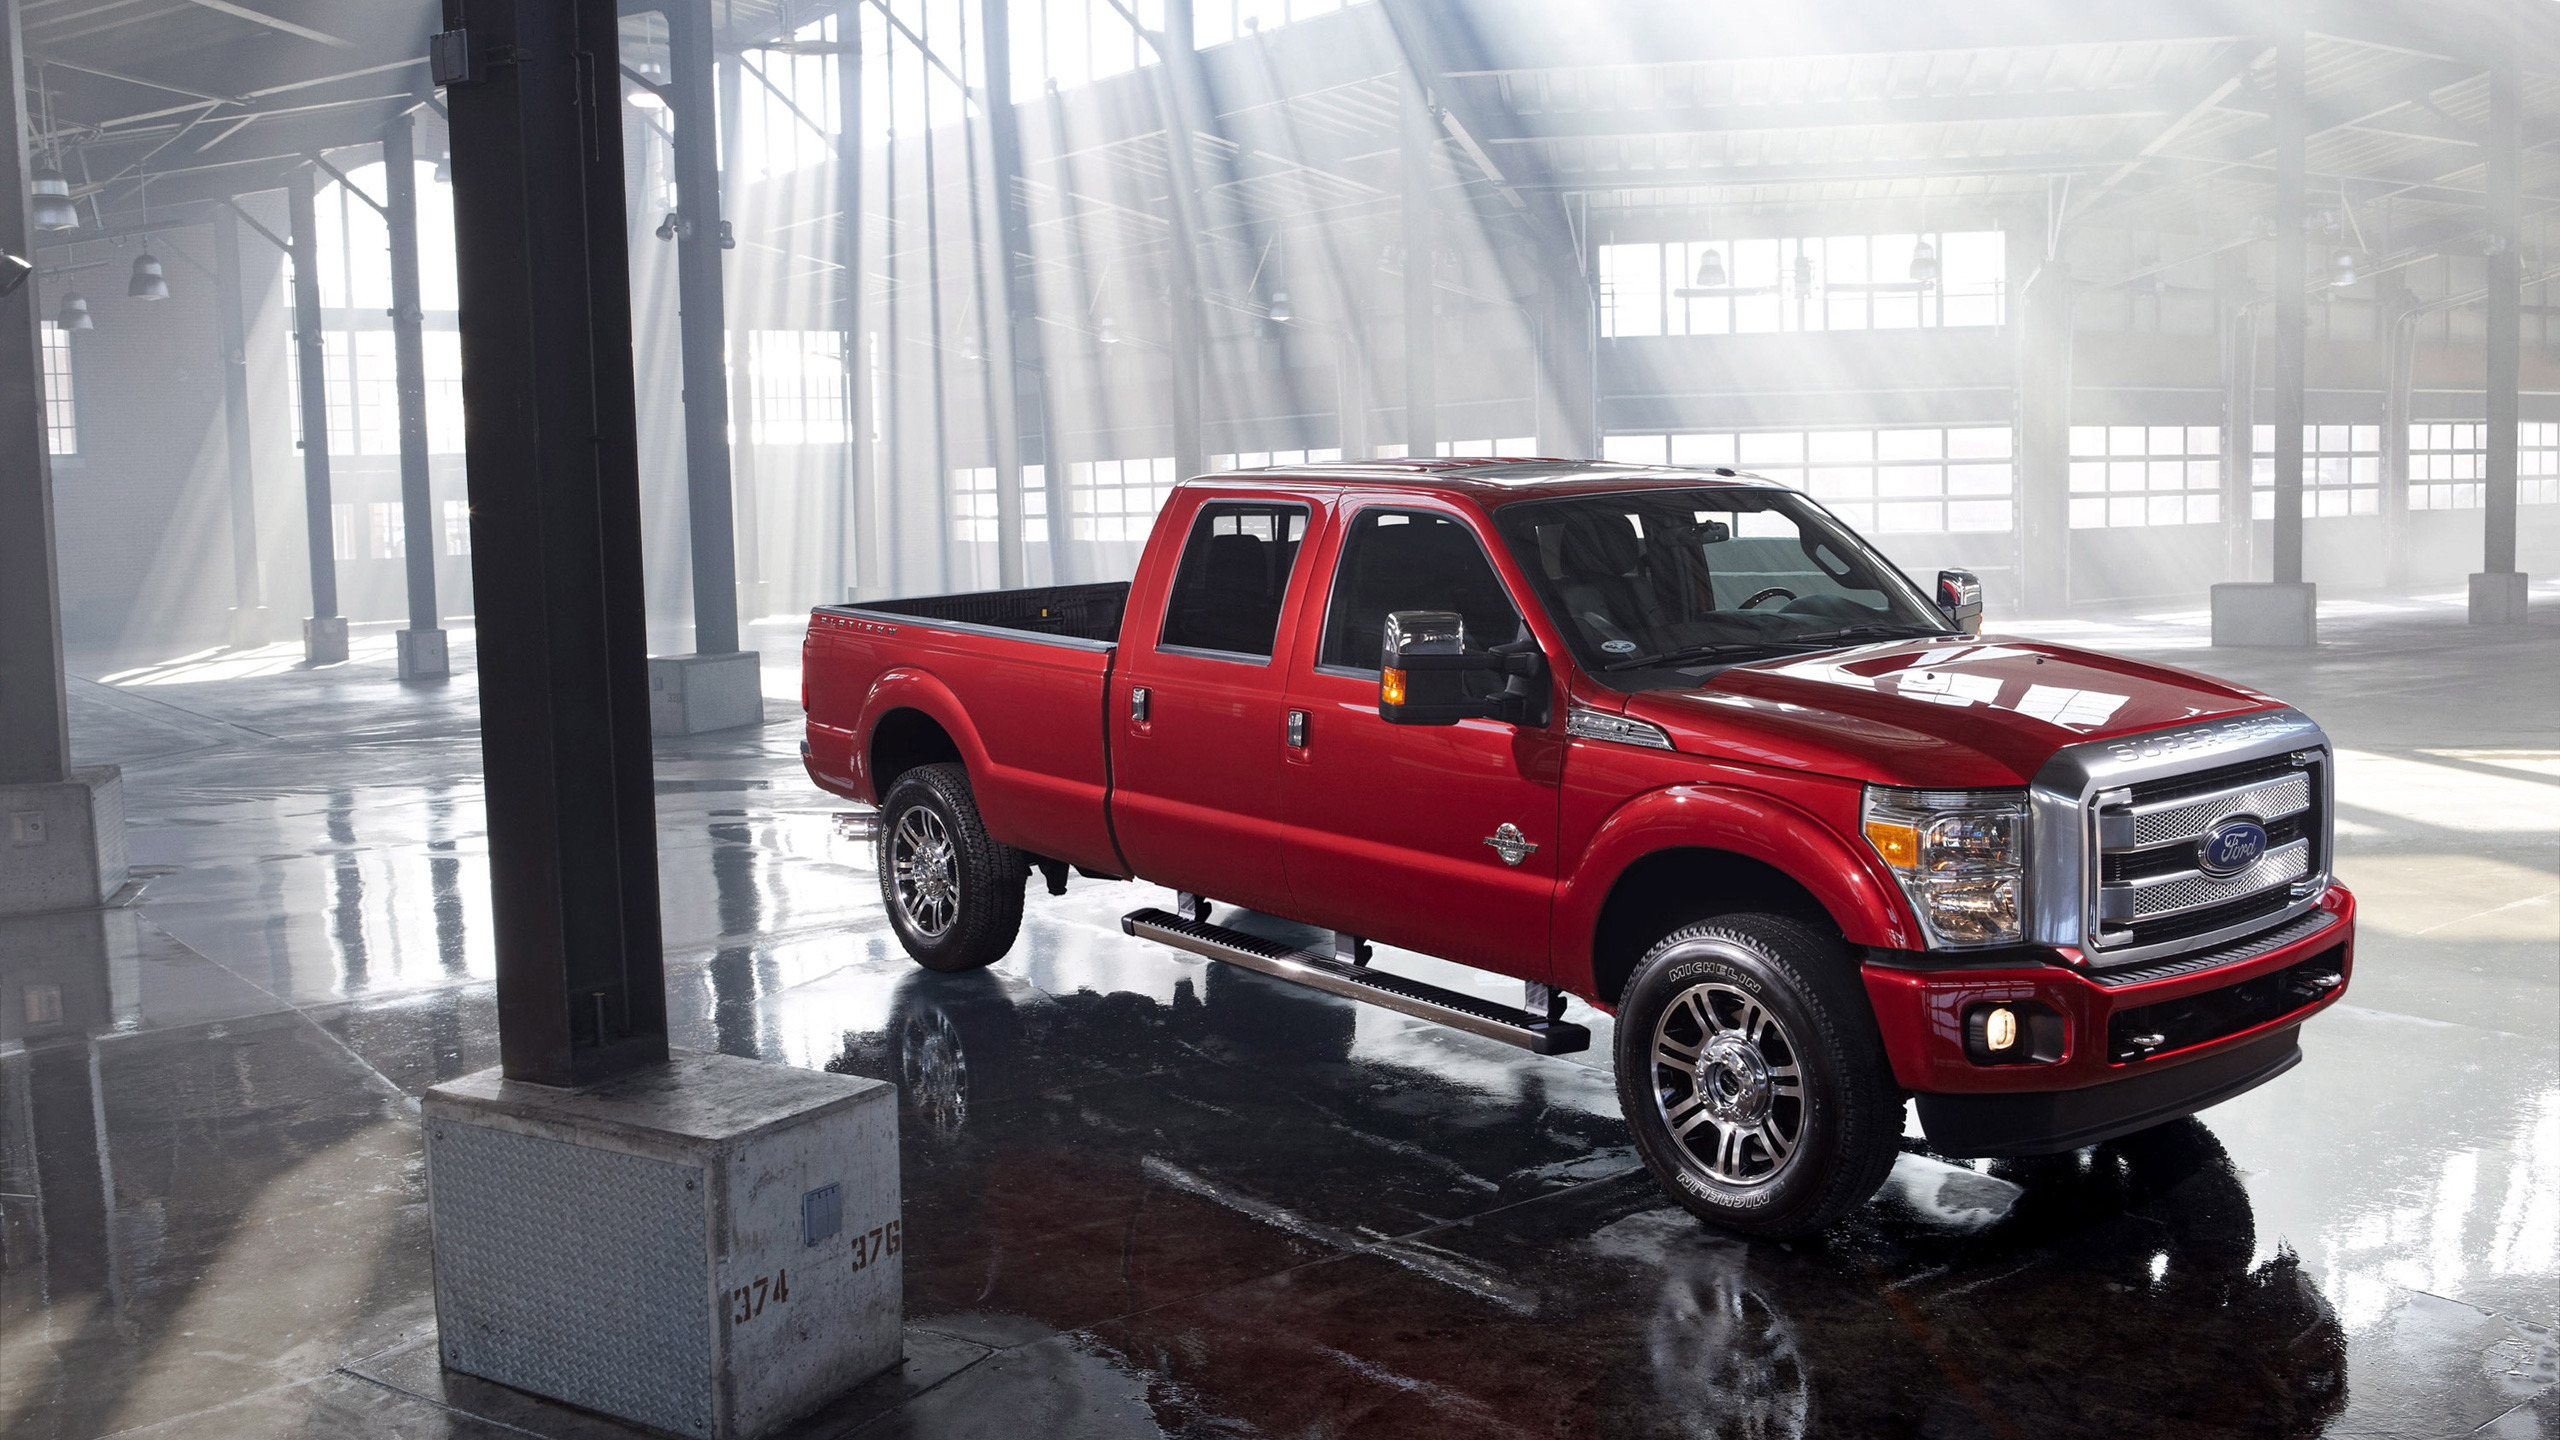 2013 Ford Super Duty Platinum Red for 2560x1440 HDTV resolution